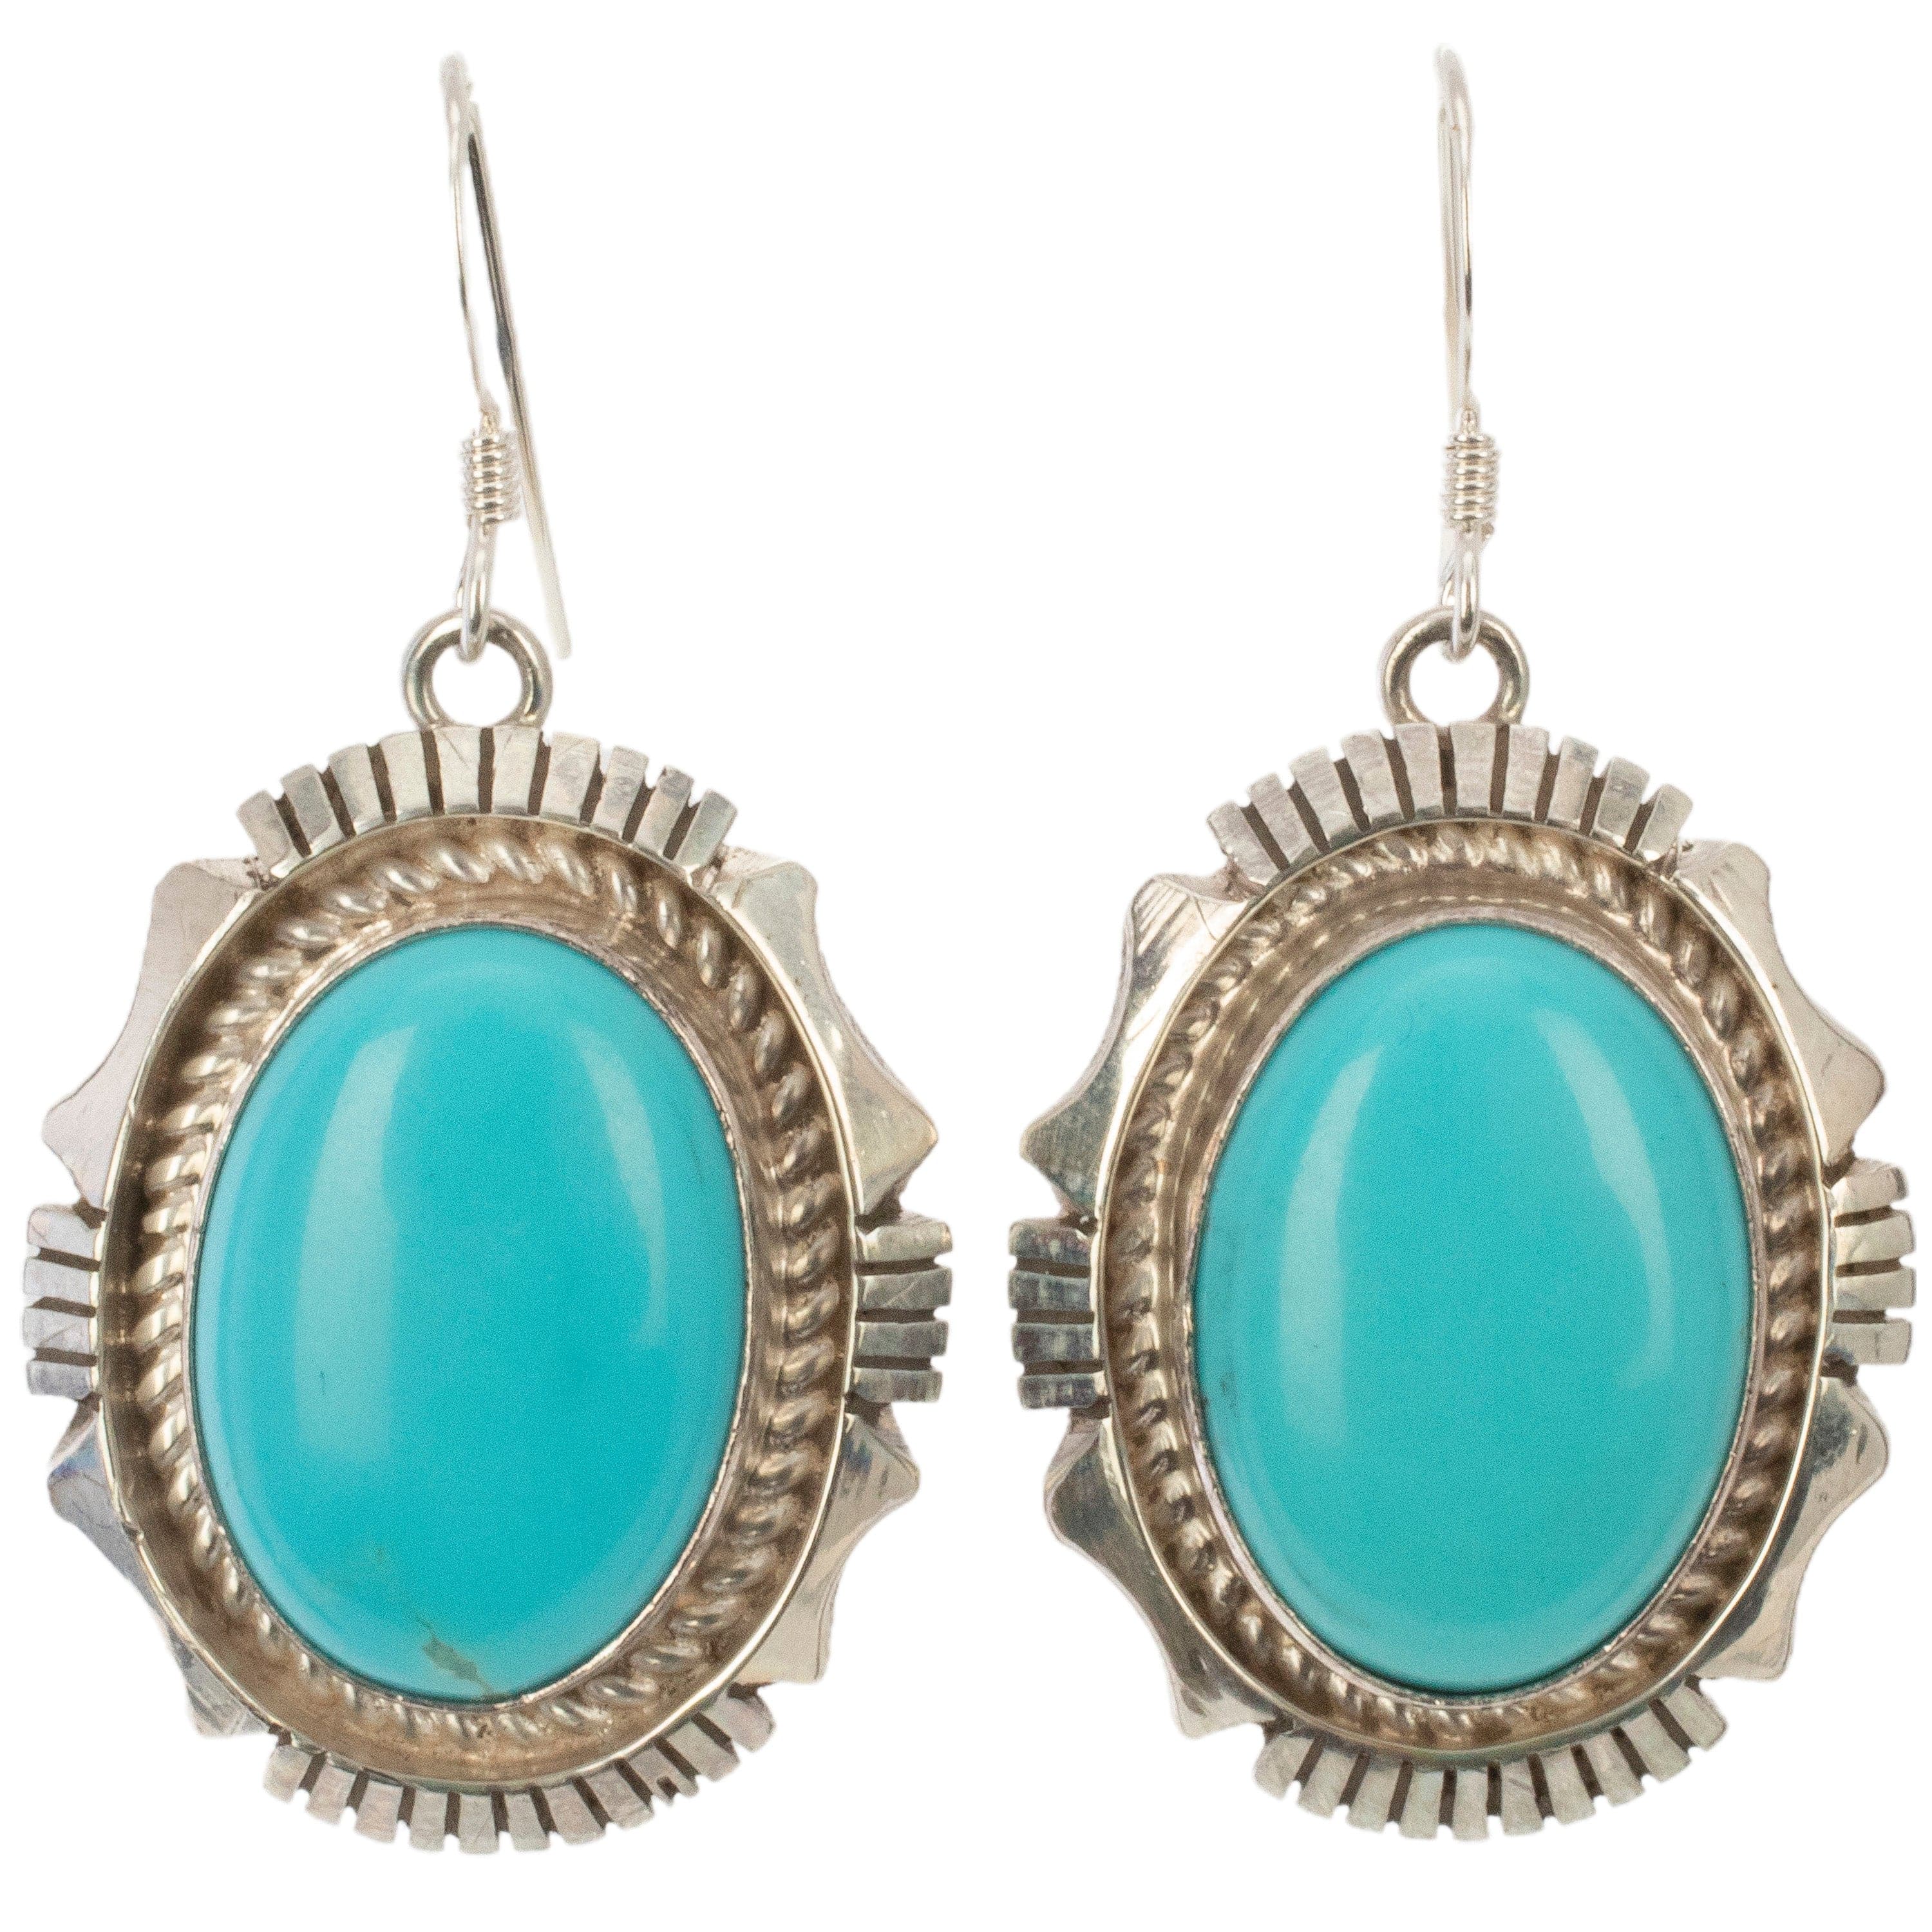 Kalifano Native American Jewelry Eddie Secatero Navajo Kingman Turquoise Round USA Native American Made 925 Sterling Silver Earrings with French Hook NAE300.016